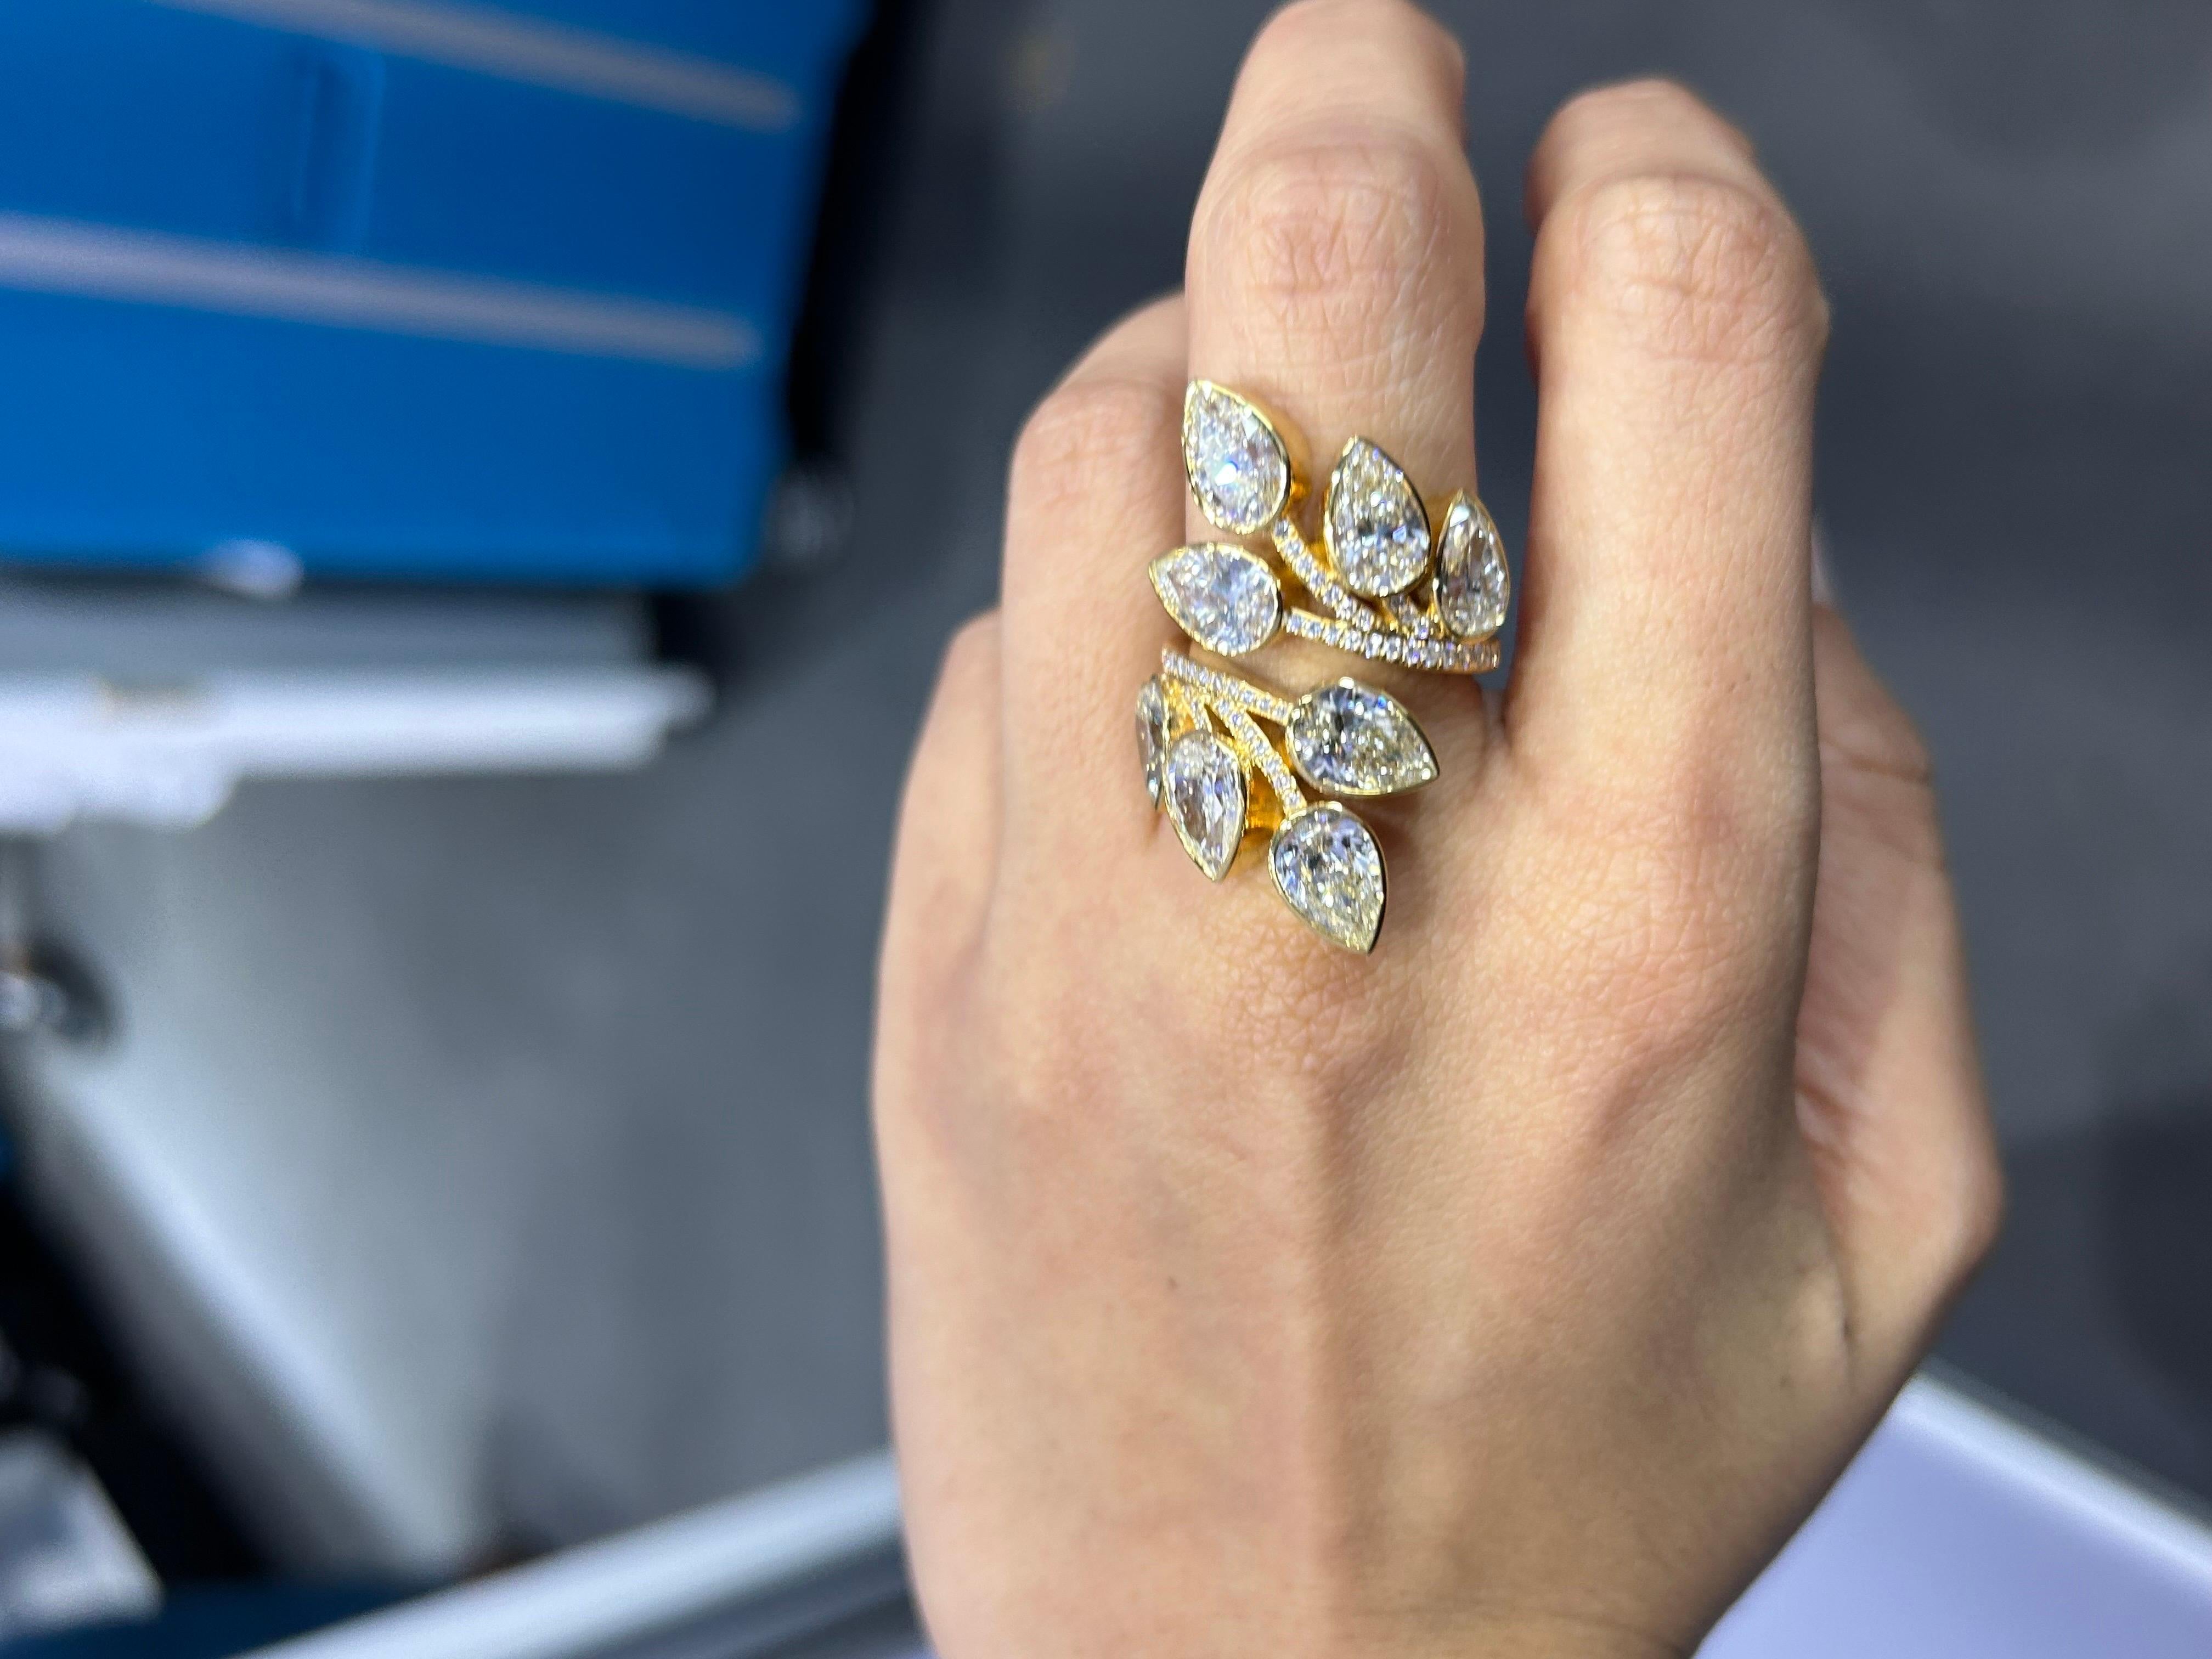 All 8 pieces are GIA certified, L/M color, VS/SI quality - weighing average 1 carat each. Set in solid 18K Yellow Gold. The ring is currently sized at US7, can be resized. 